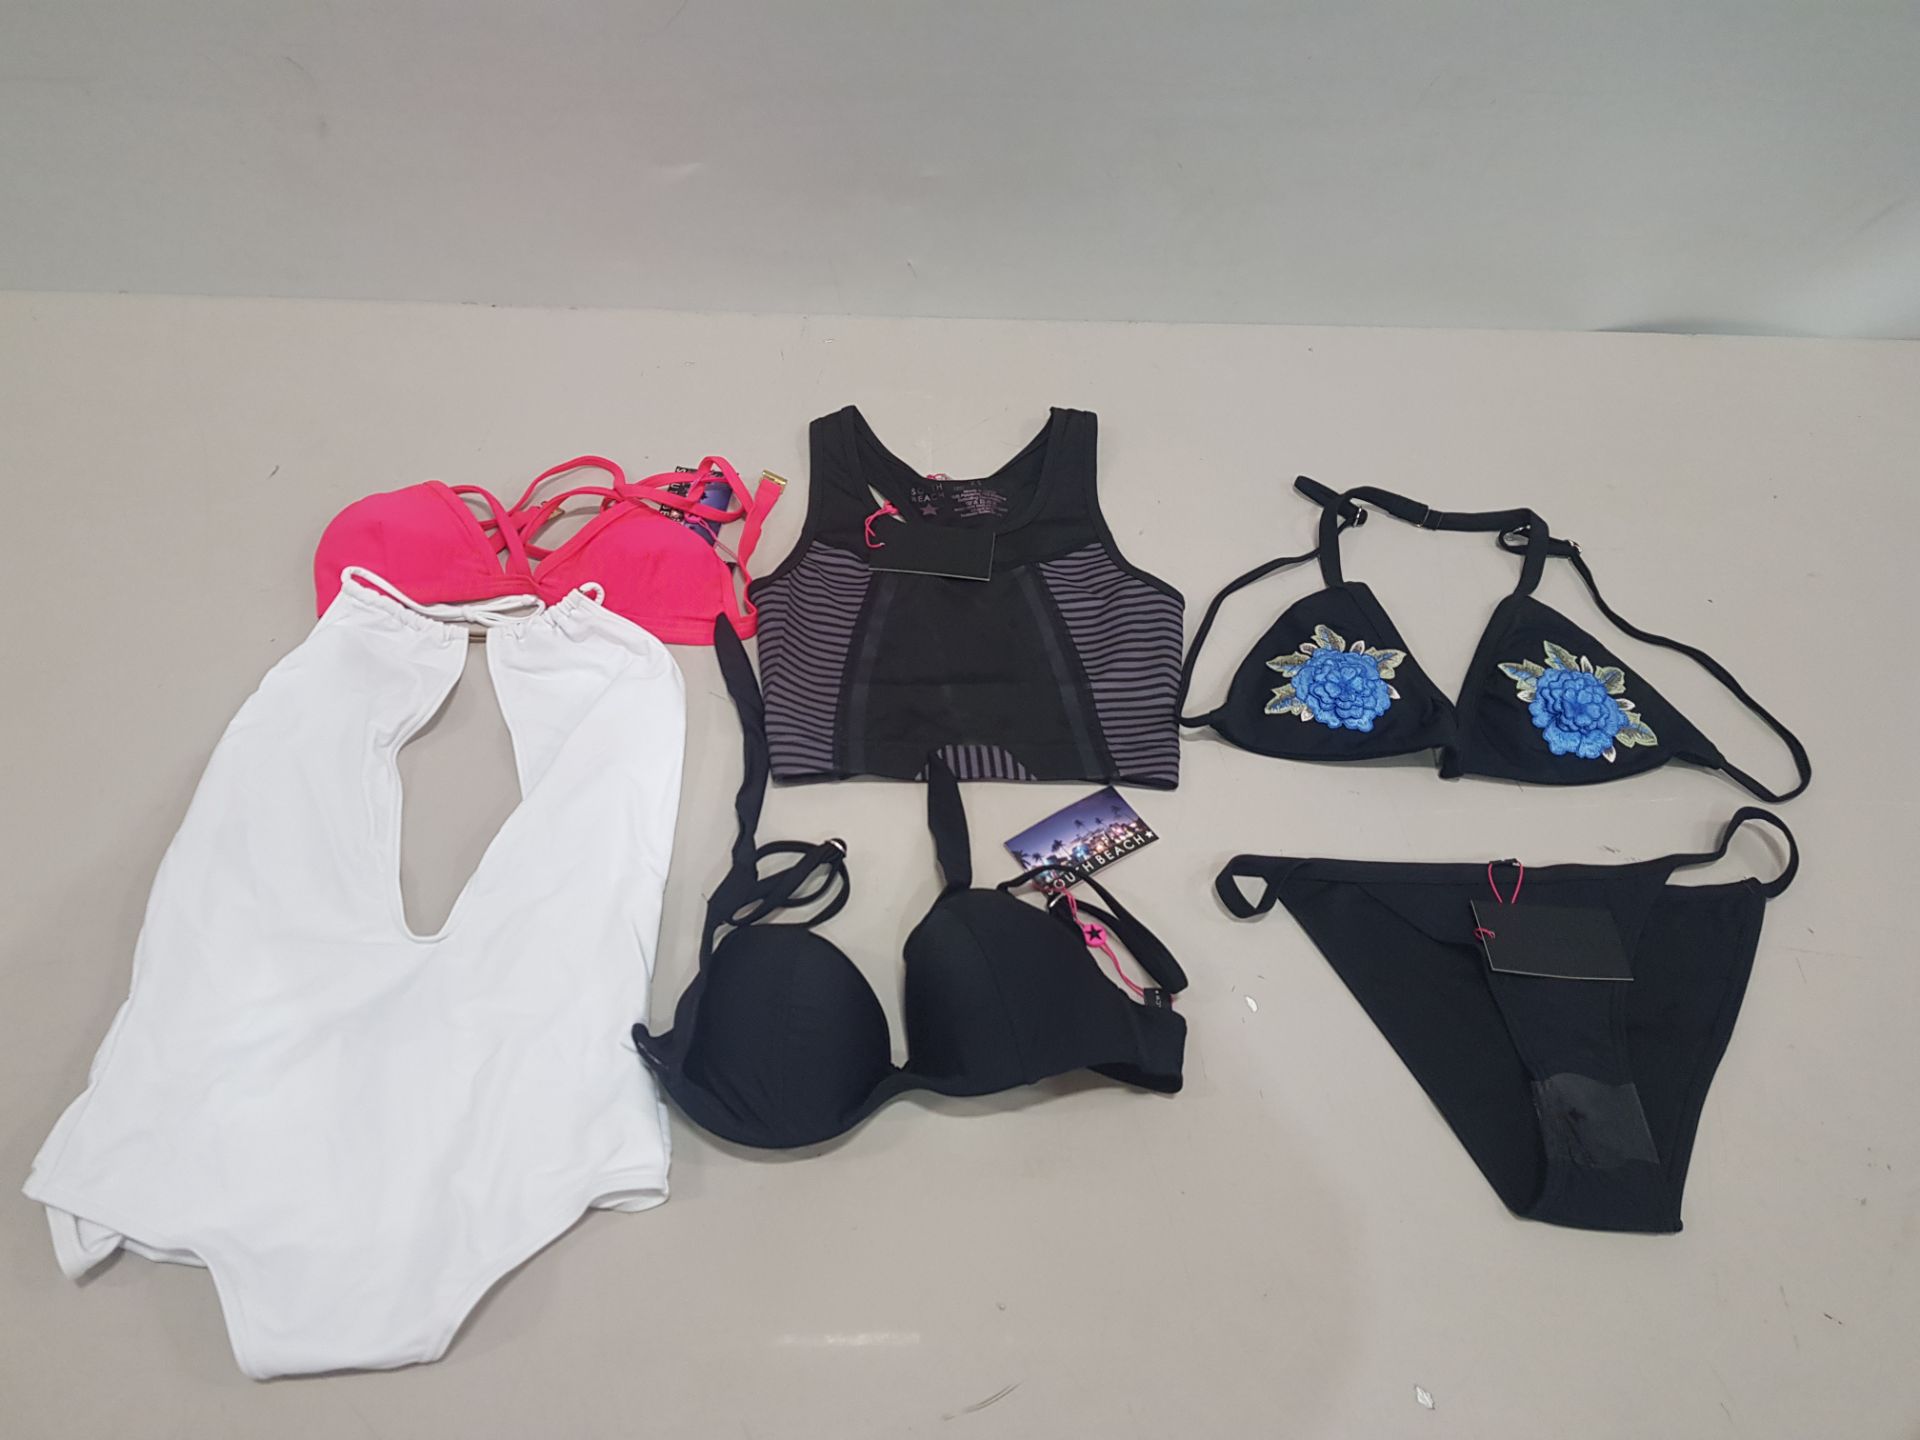 200 X BRAND NEW MIXED CLOTHING LOT CONTAINING SOUTH BEACH VICKY NEON PINK PADDED BIKINI TOPS / SOUTH